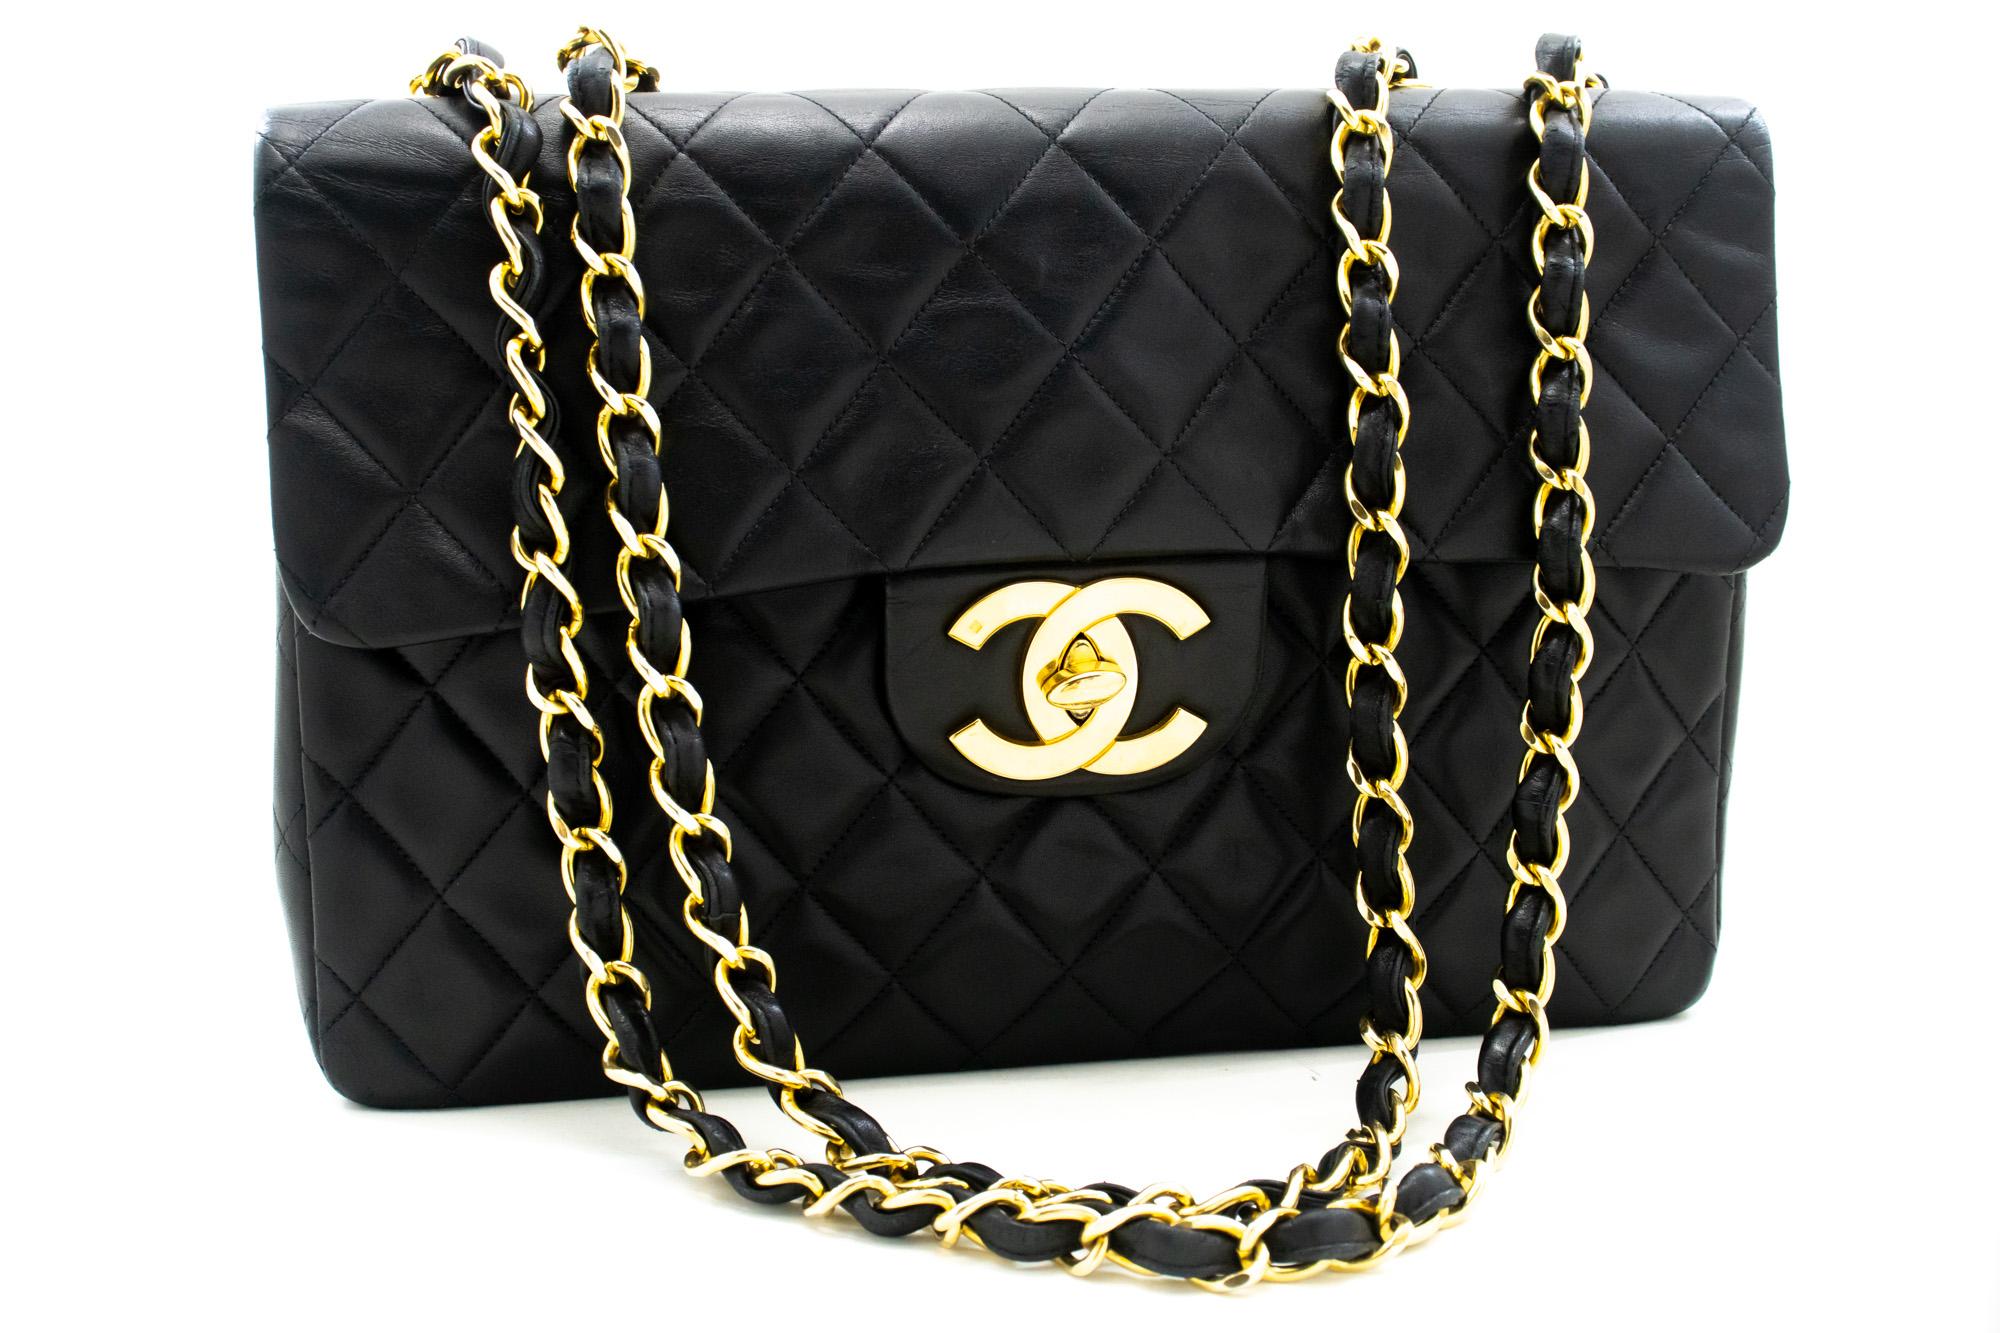 An authentic CHANEL Classic Large 13